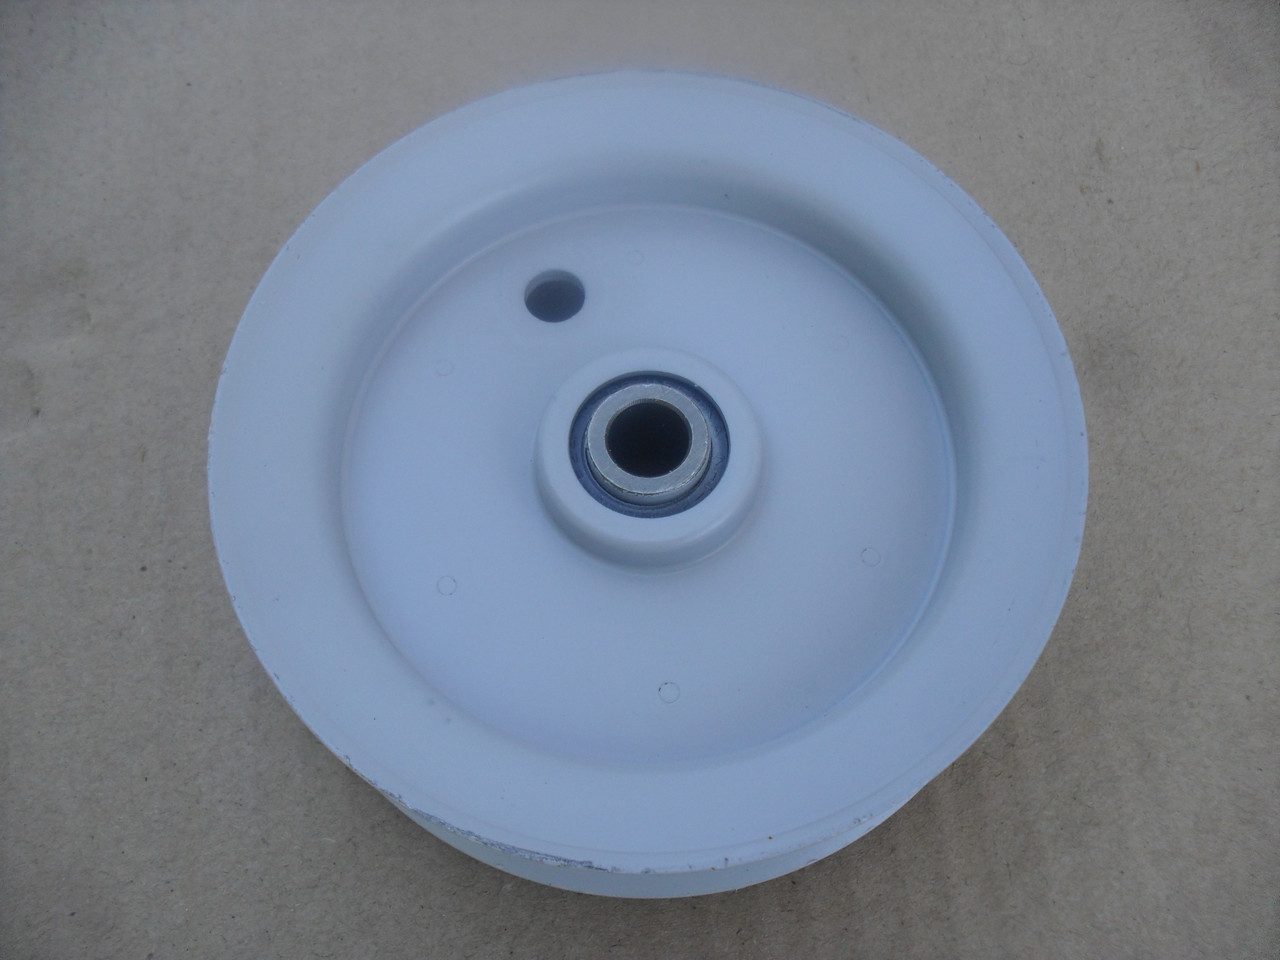 Drive Idler Pulley for Kees 52628 5-2628 Height 1-3/16" ID 3/8" OD 4"